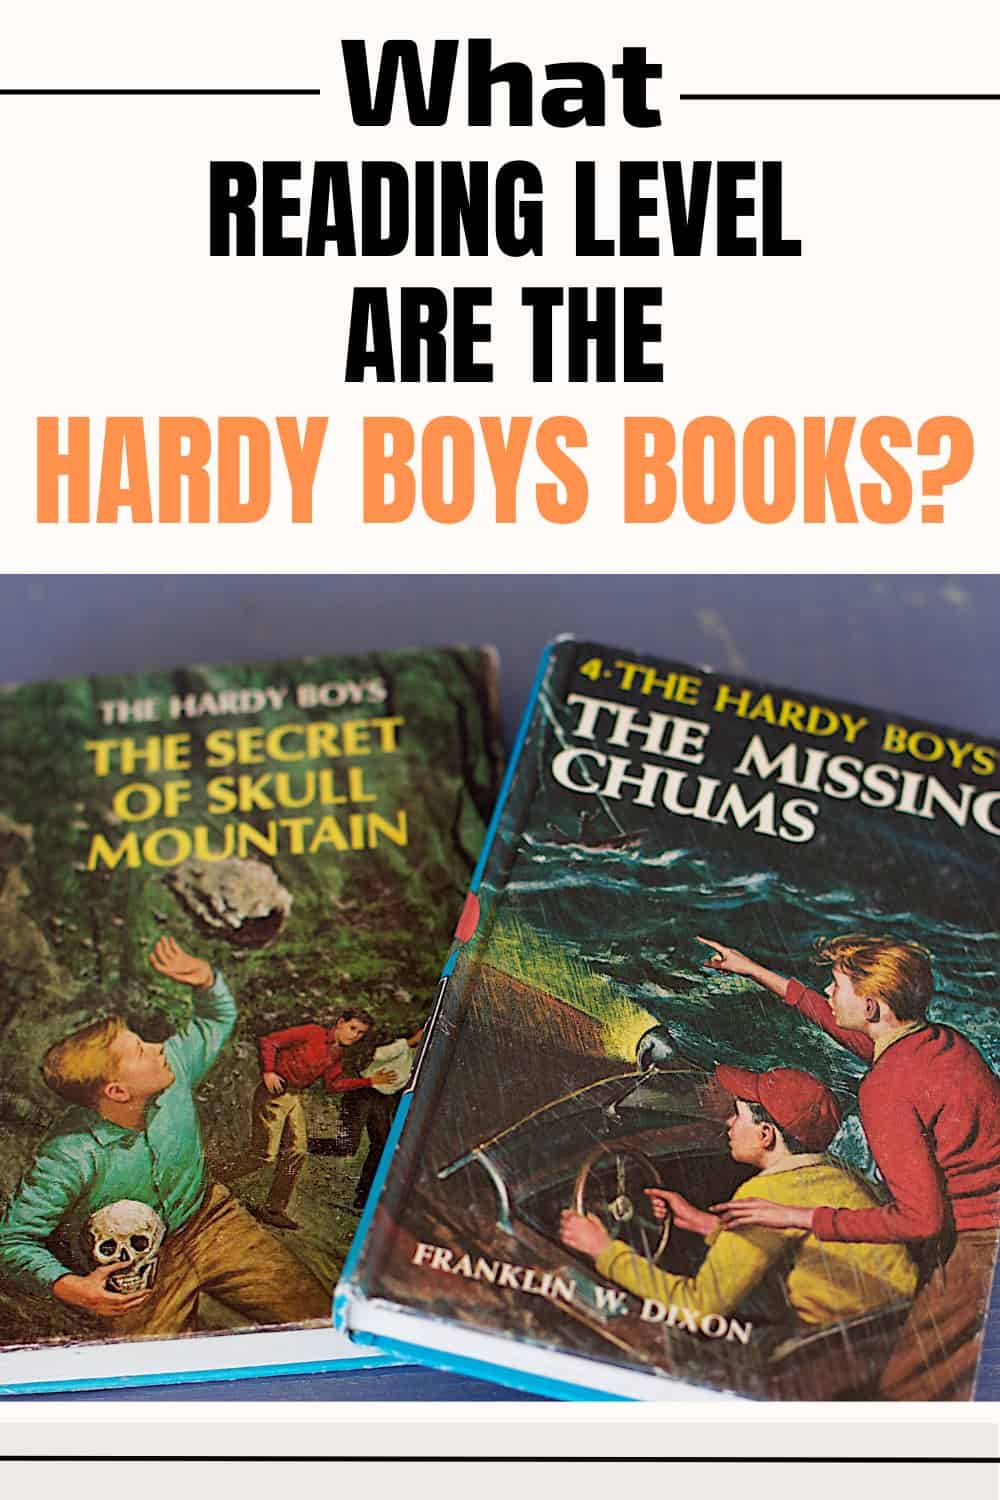 Hardy Boys books are for young readers 8 to 12 years old